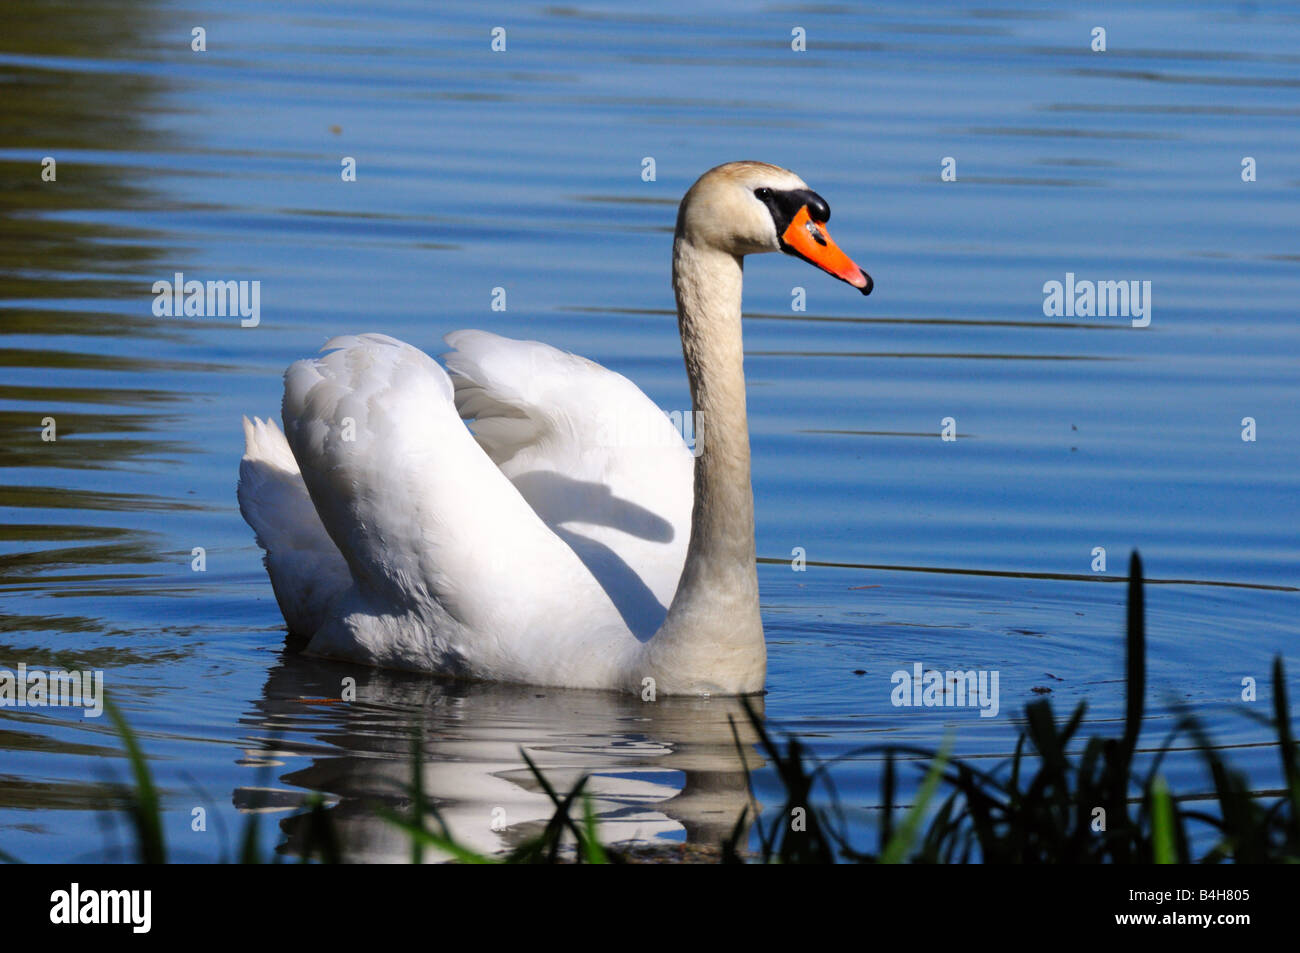 Close-up of swan swimming in lake Stock Photo